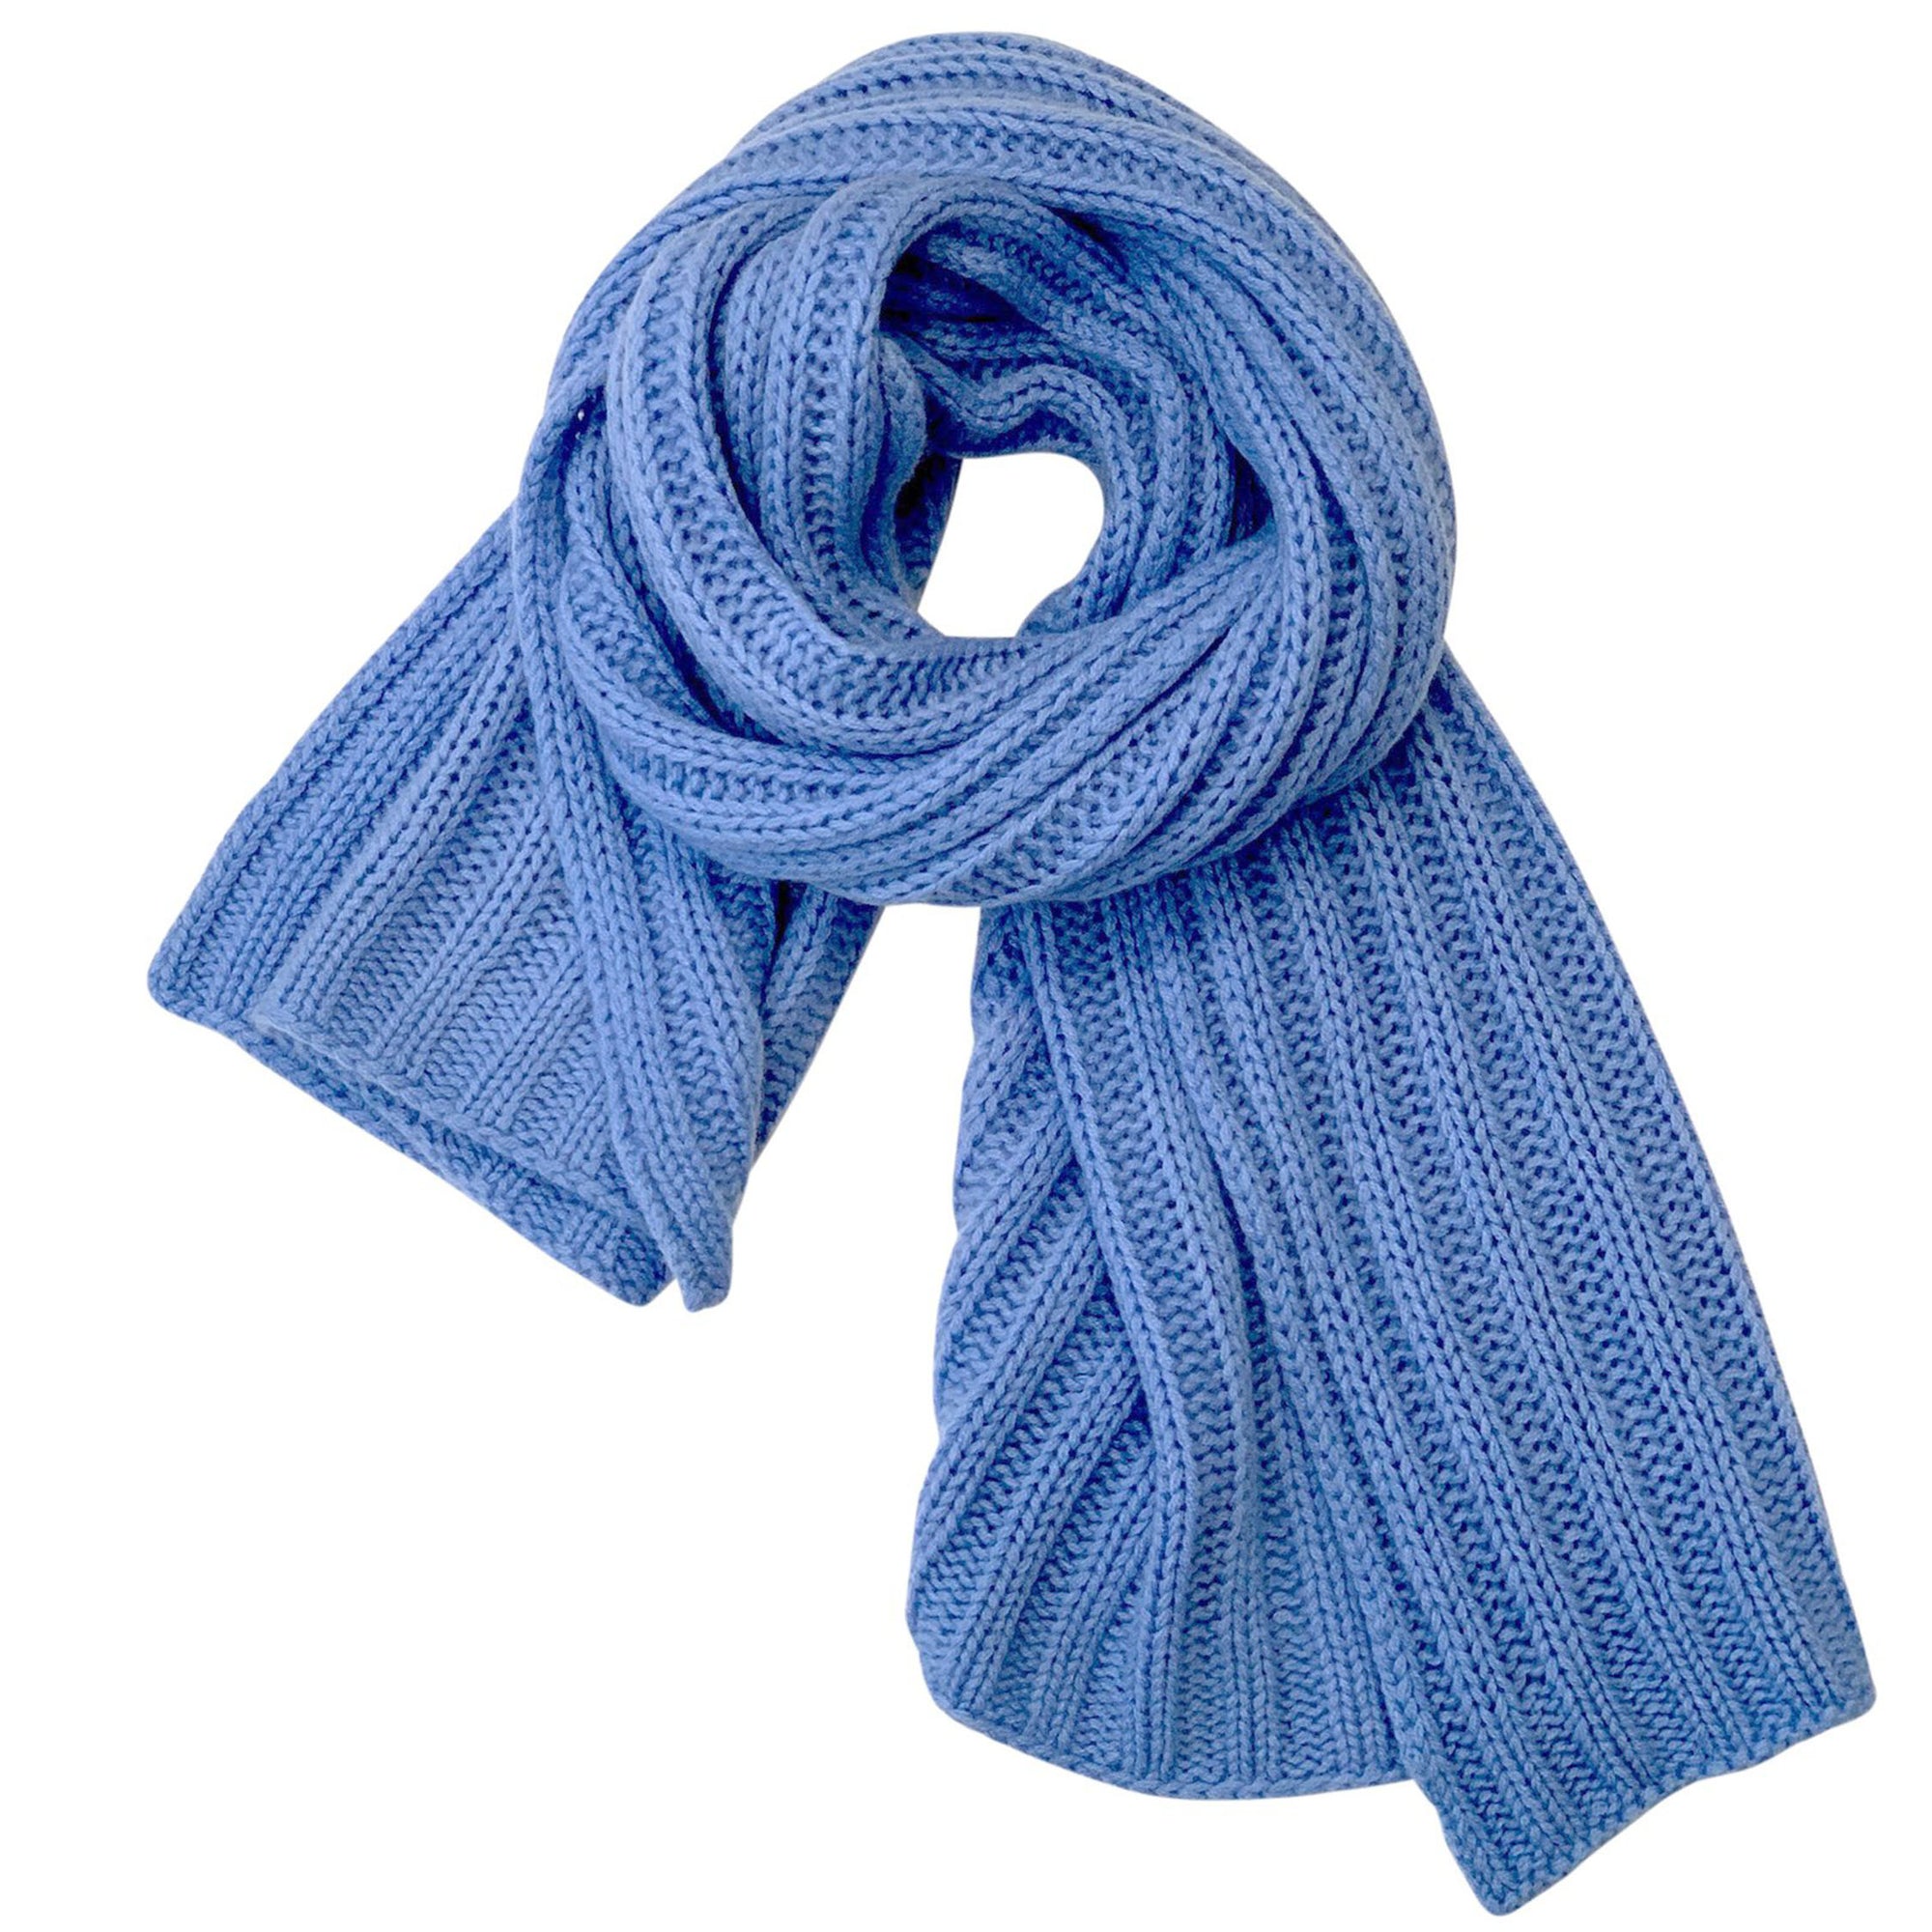 PETITE CALIN Kaschmirschal, Cashmere scarf, Blue, Sustainable cashmere, Kaschmir, Mütze, Handmade, Zero waste, Fair trade, Organic, Handcrafted, Handmade, Made in Europe, Made in Germany, Female Empowerment, Shop now - the wearness online-shop - ETHICAL & SUSTAINABLE LUXURY FASHION 